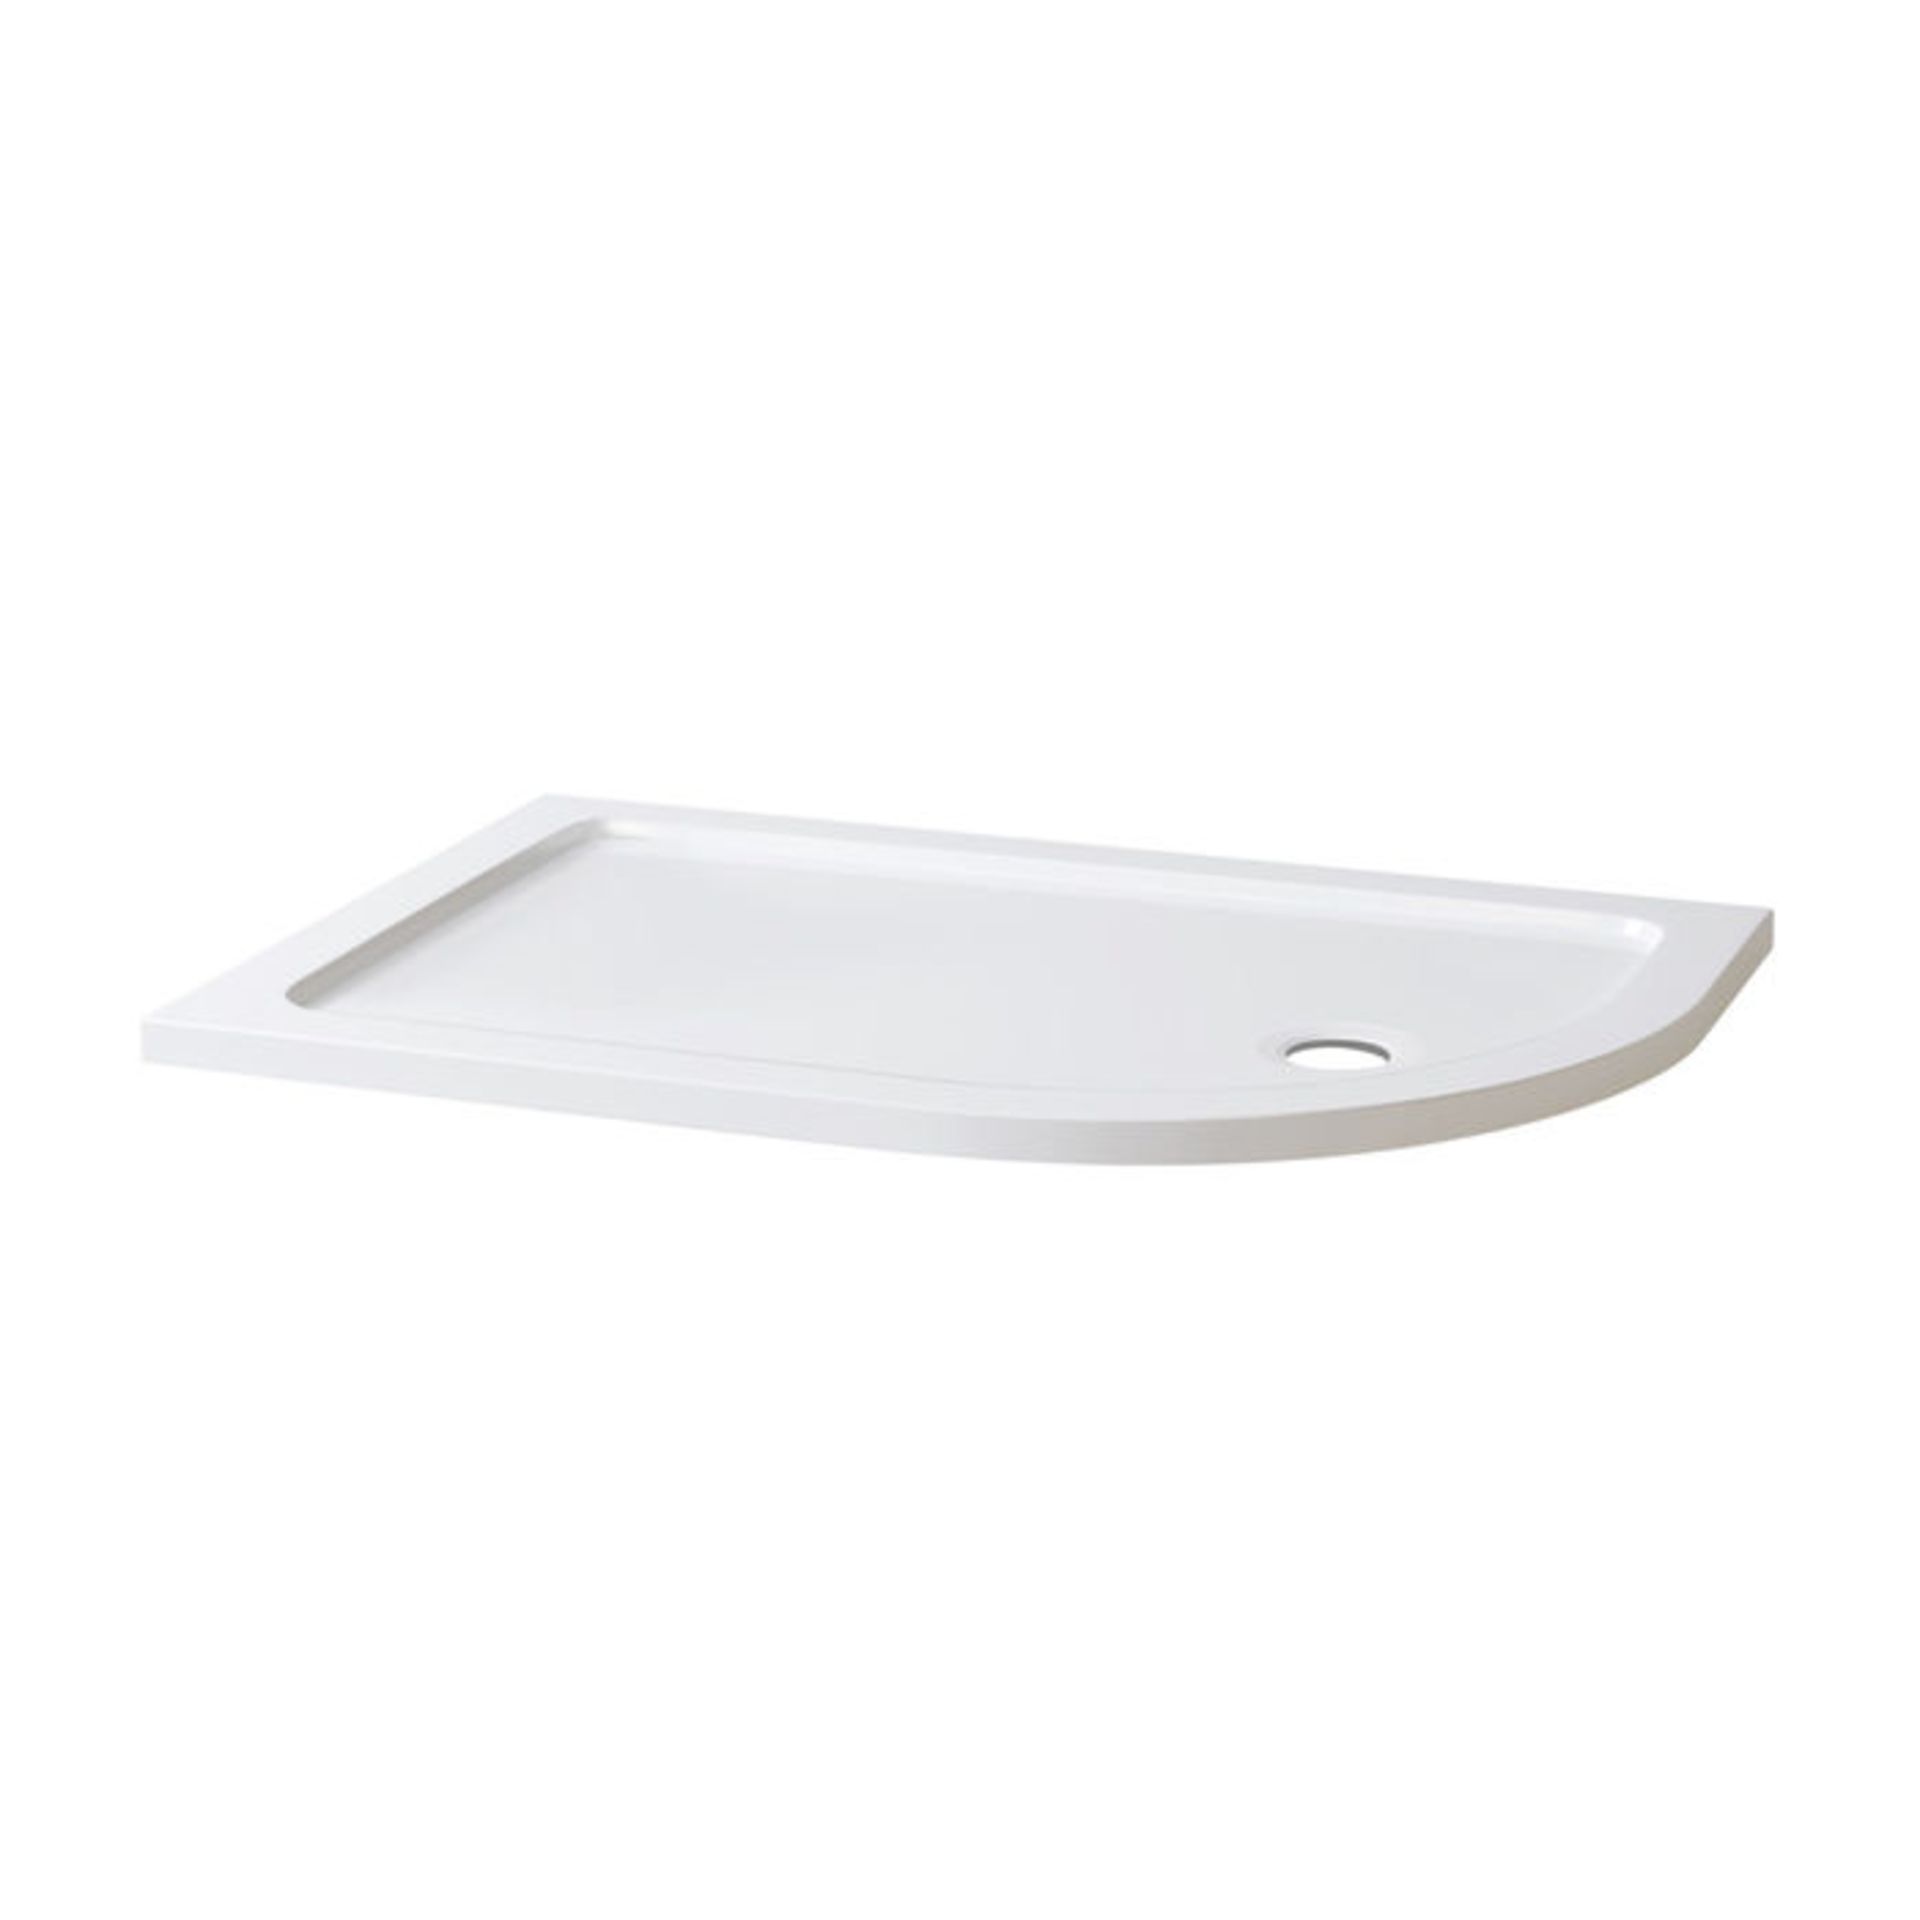 (AD135) 1200x800mm Offset Quadrant Ultra Slim Stone Shower Tray - Right. Low profile ultra slim - Image 2 of 2